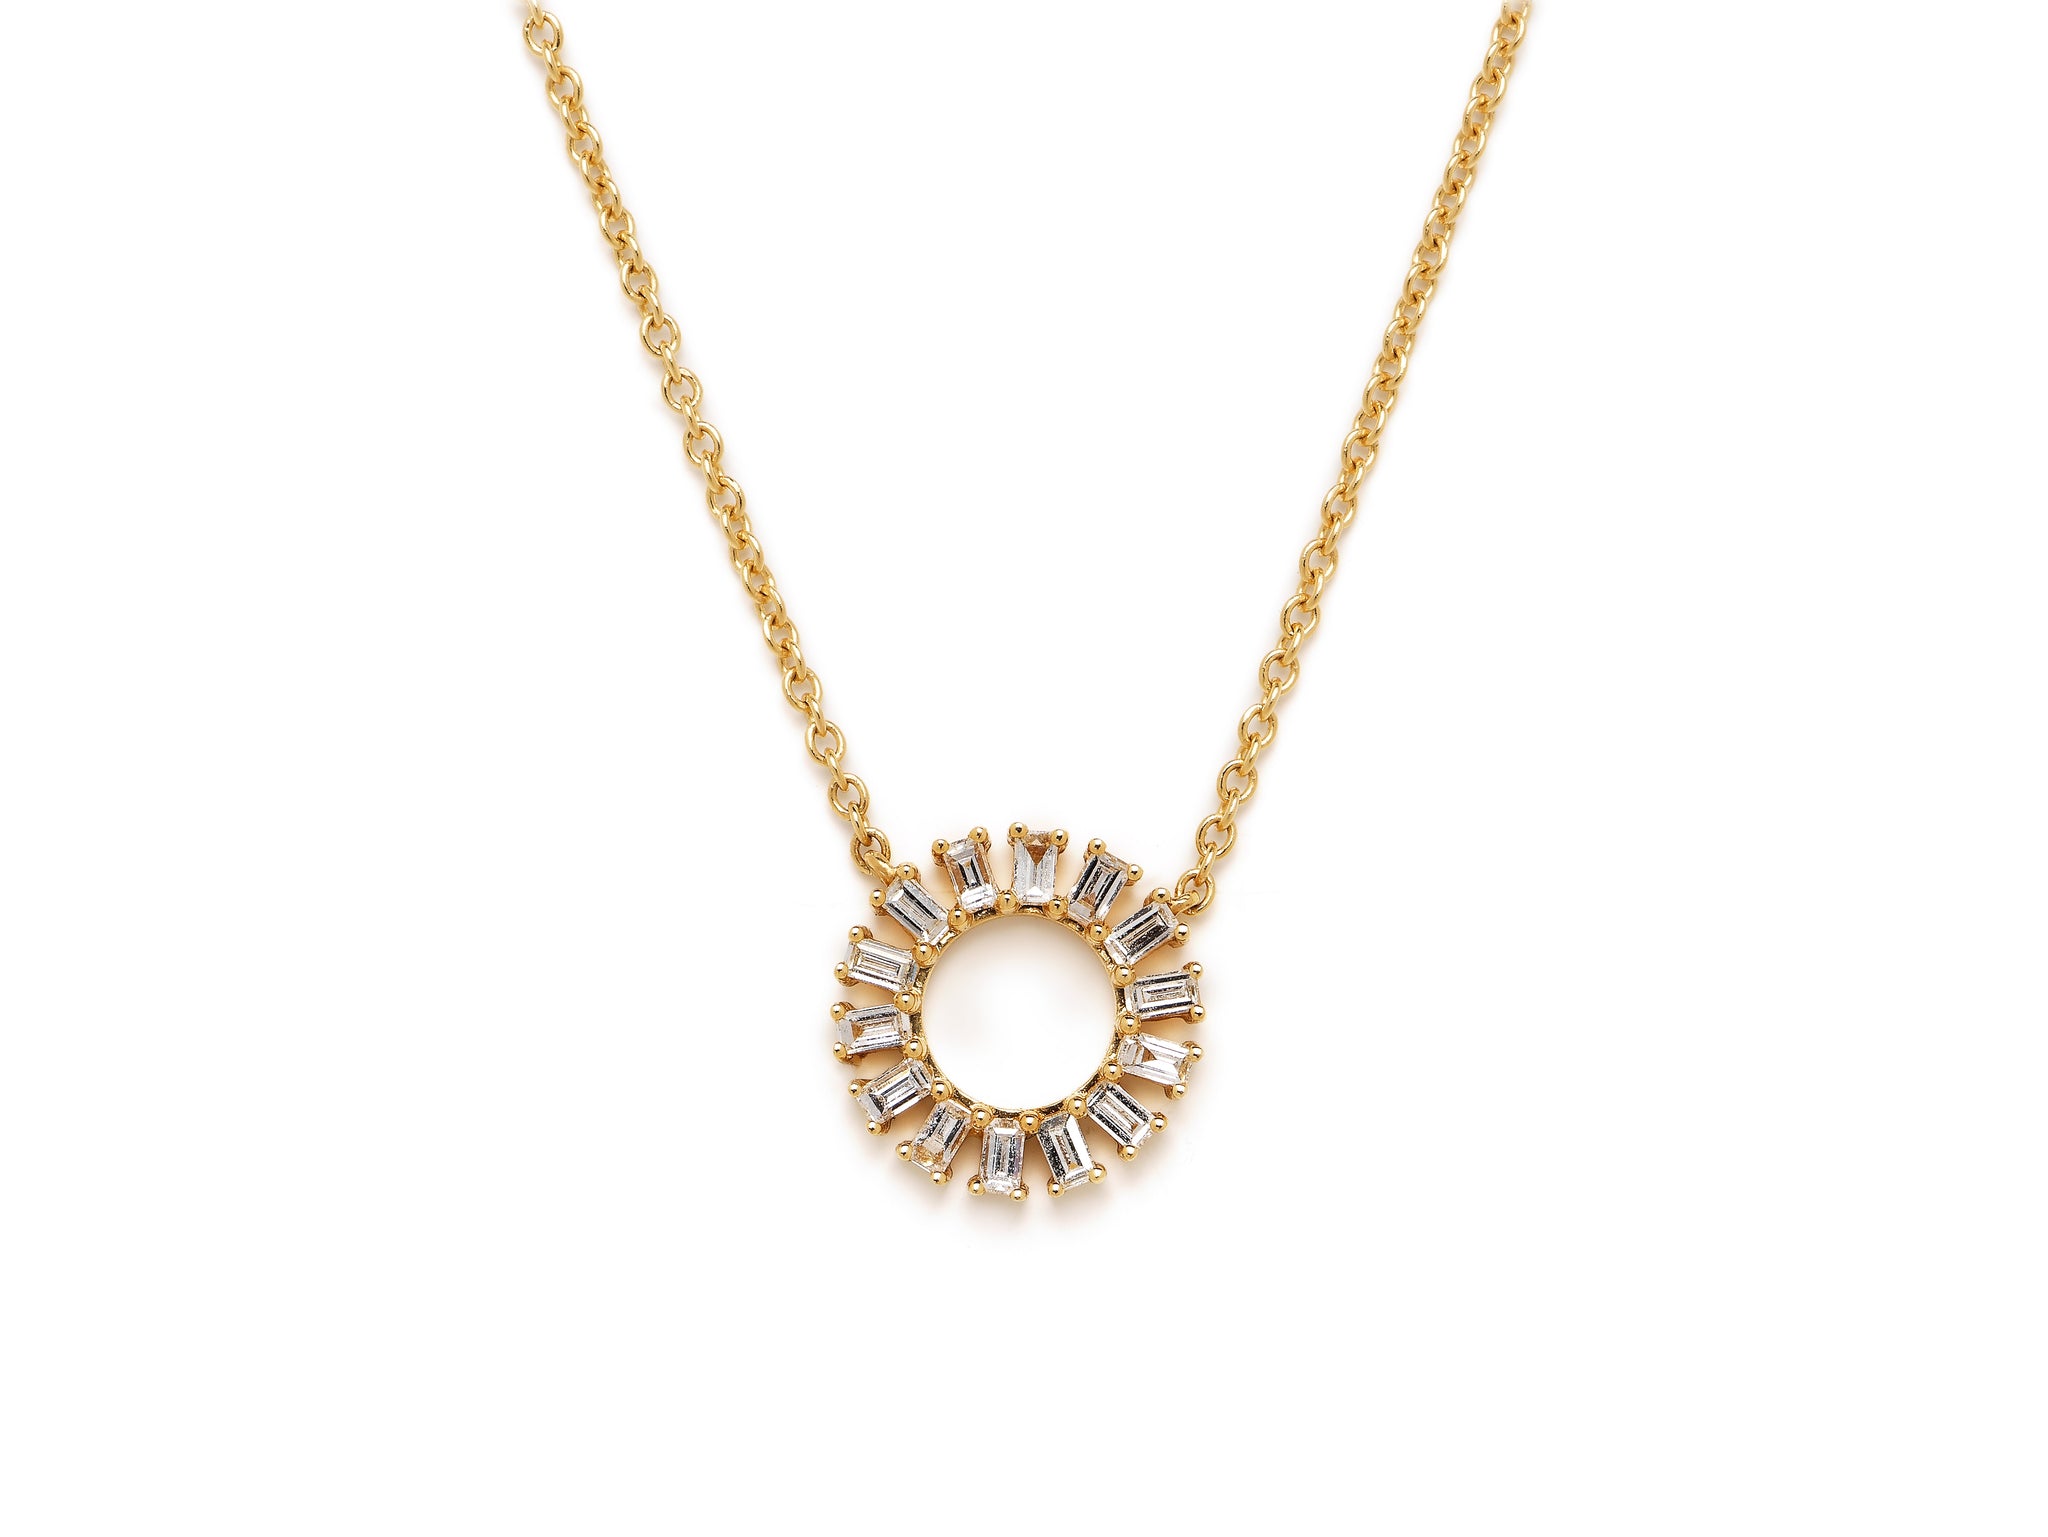 18 krt yellow gold necklace with pendant set with 14 baquette diamonds